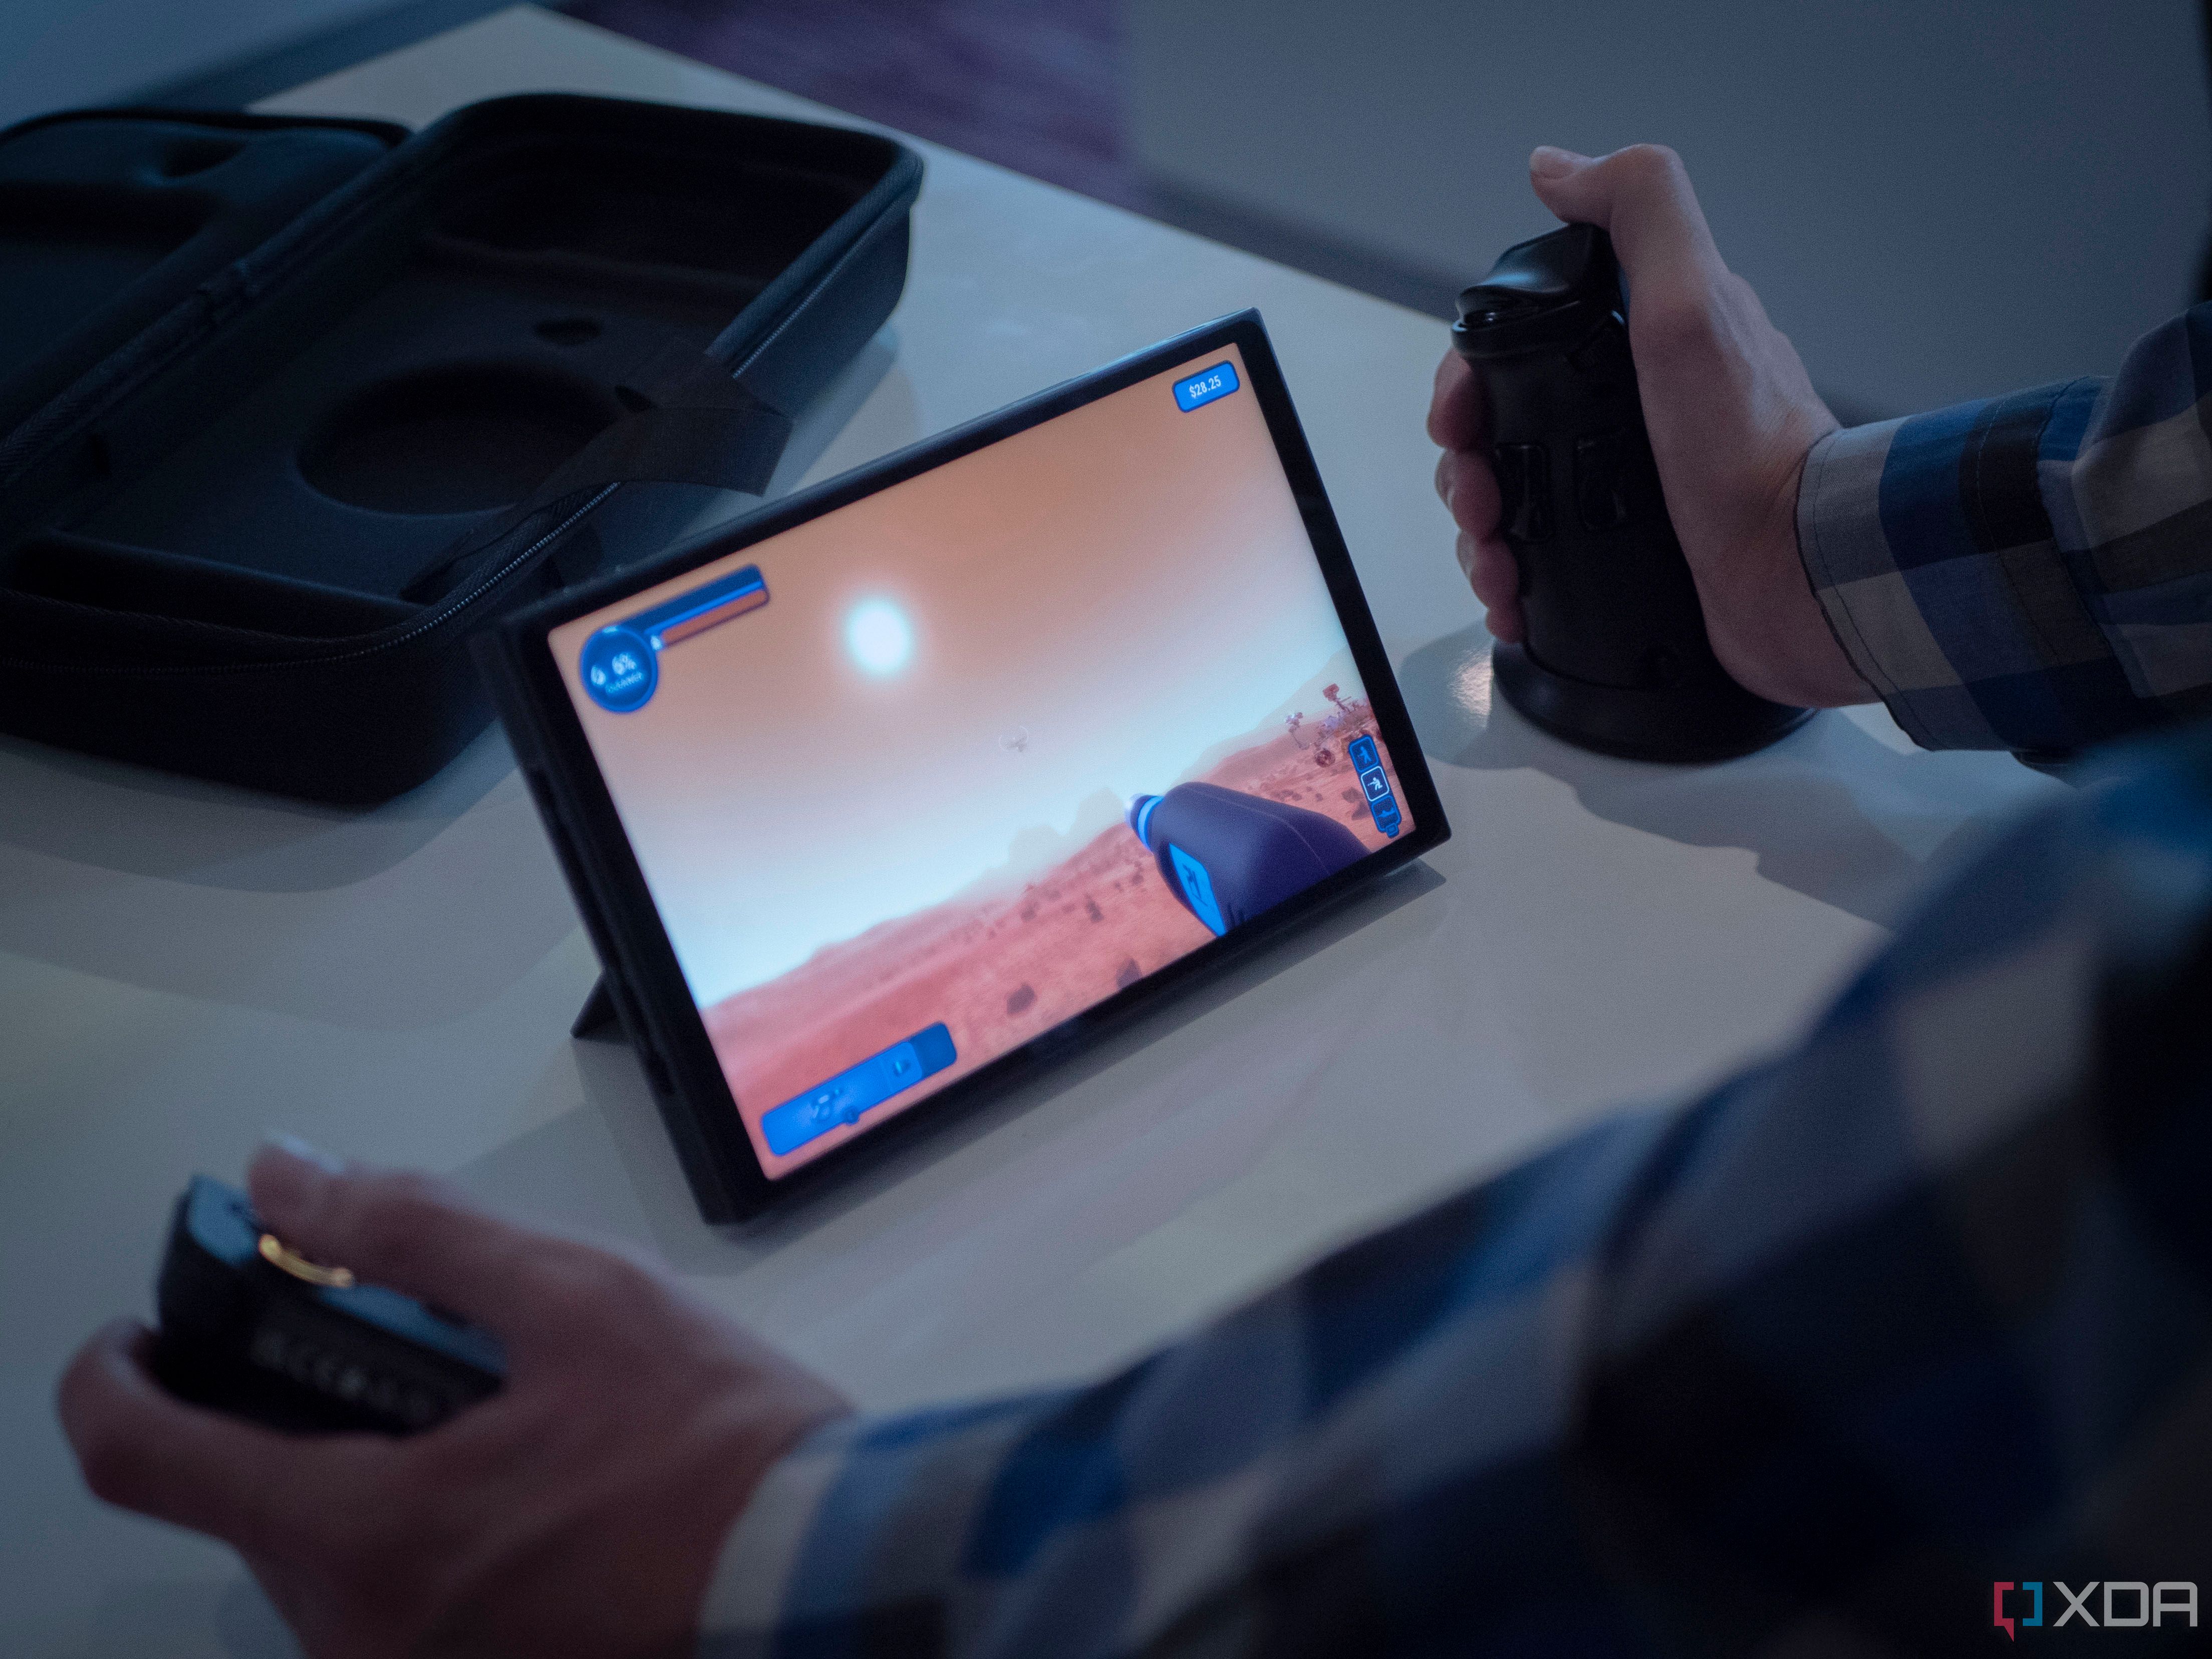 Lenovo Legion Go on a table while being played with detachable controllers